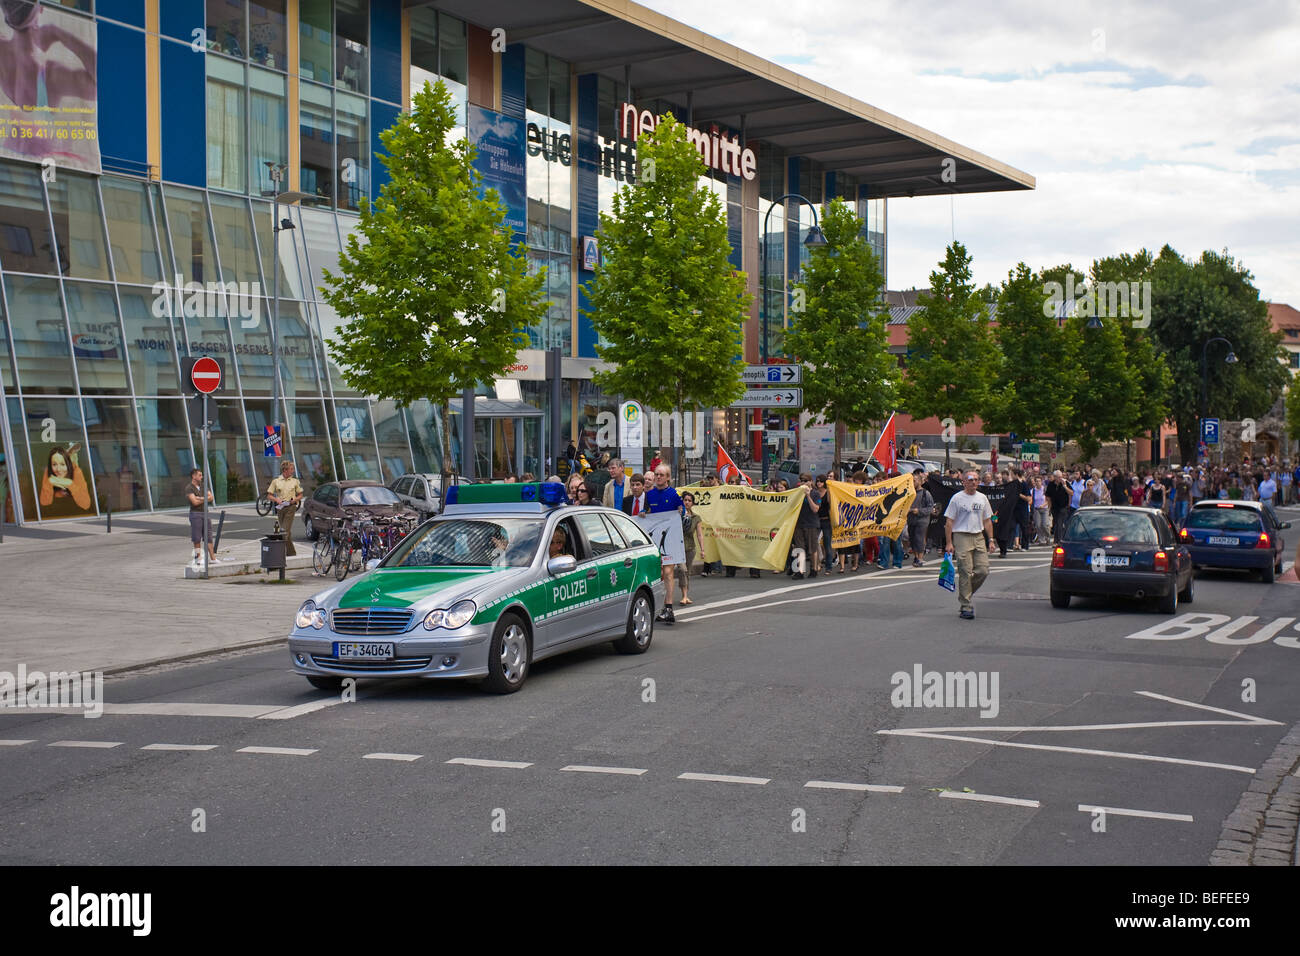 Anti-fascism and anti-racism protest rally in Jena, Thuringia, Germany with a police car escort Stock Photo